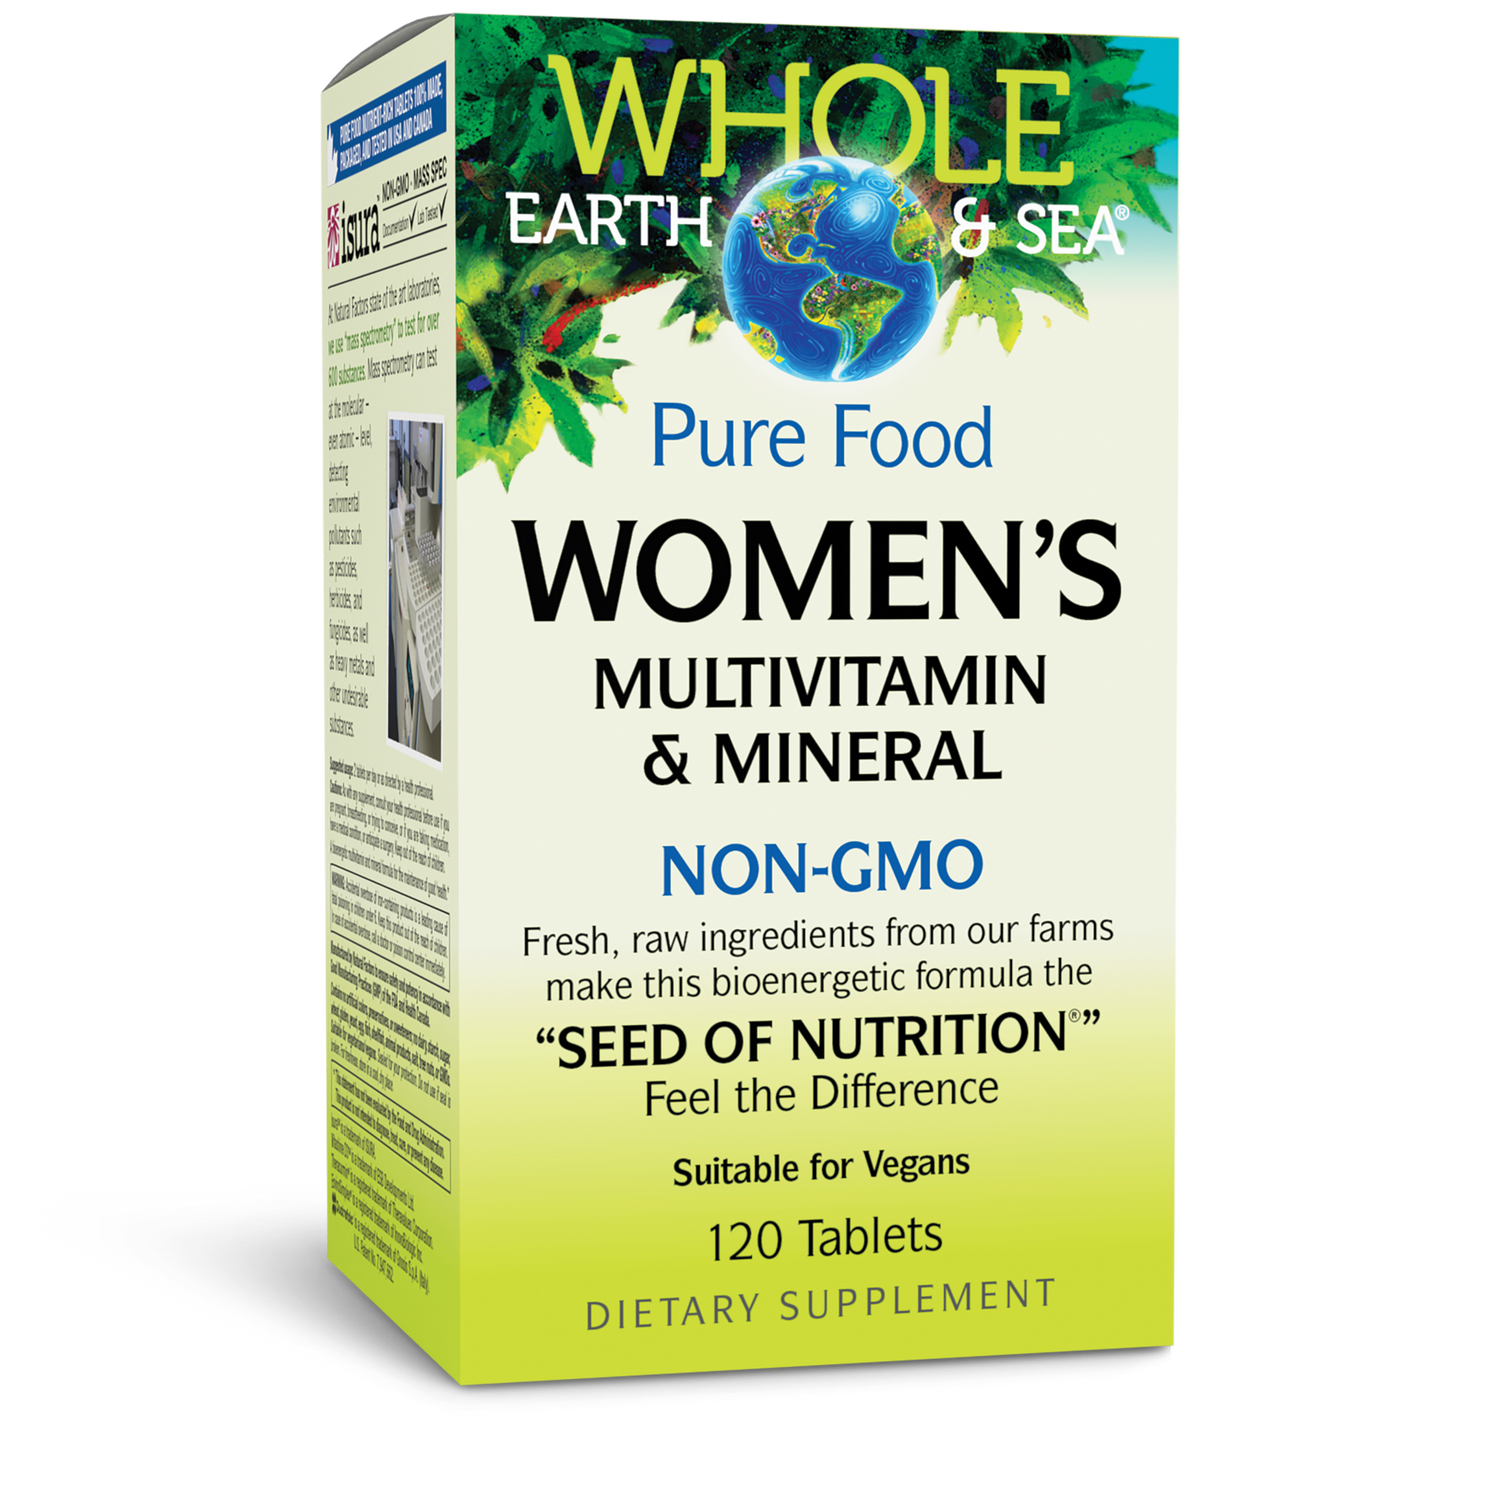 Women's Multivitamin & Mineral for Whole Earth & Sea® |variant|hi-res|35520U